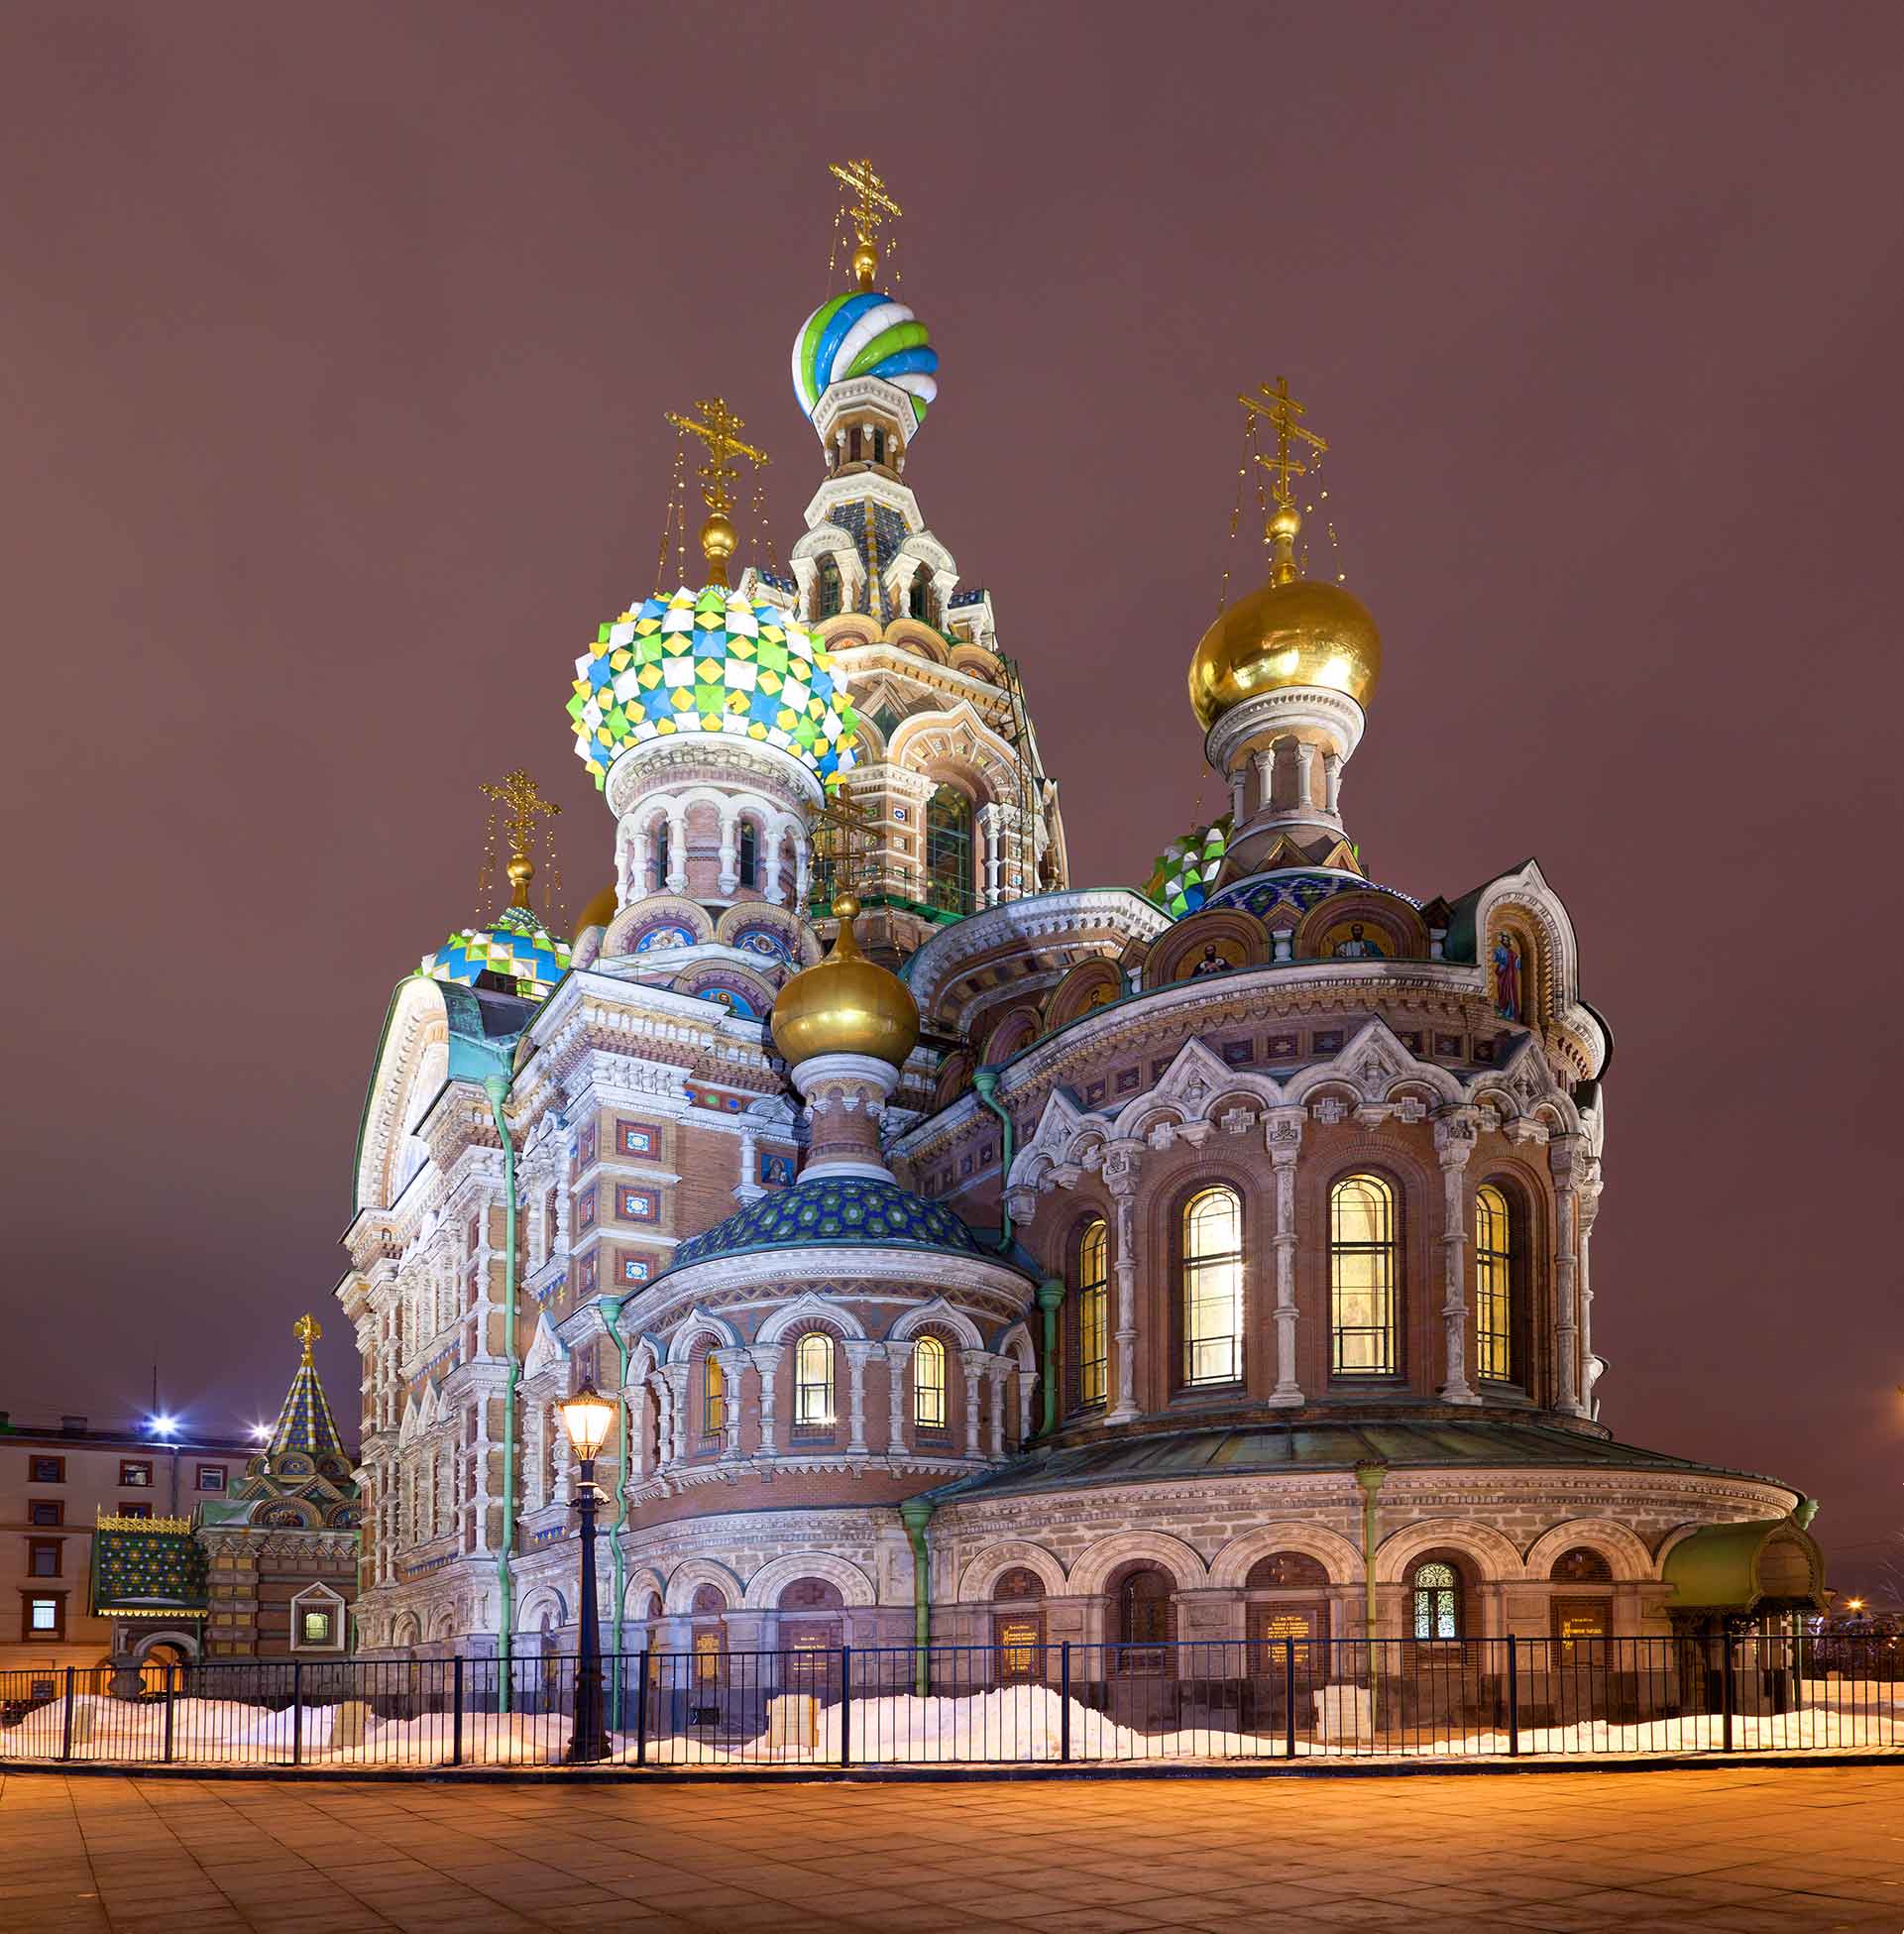 Night view of the Savior on Spilled Blood. St. Petersburg, Russia.